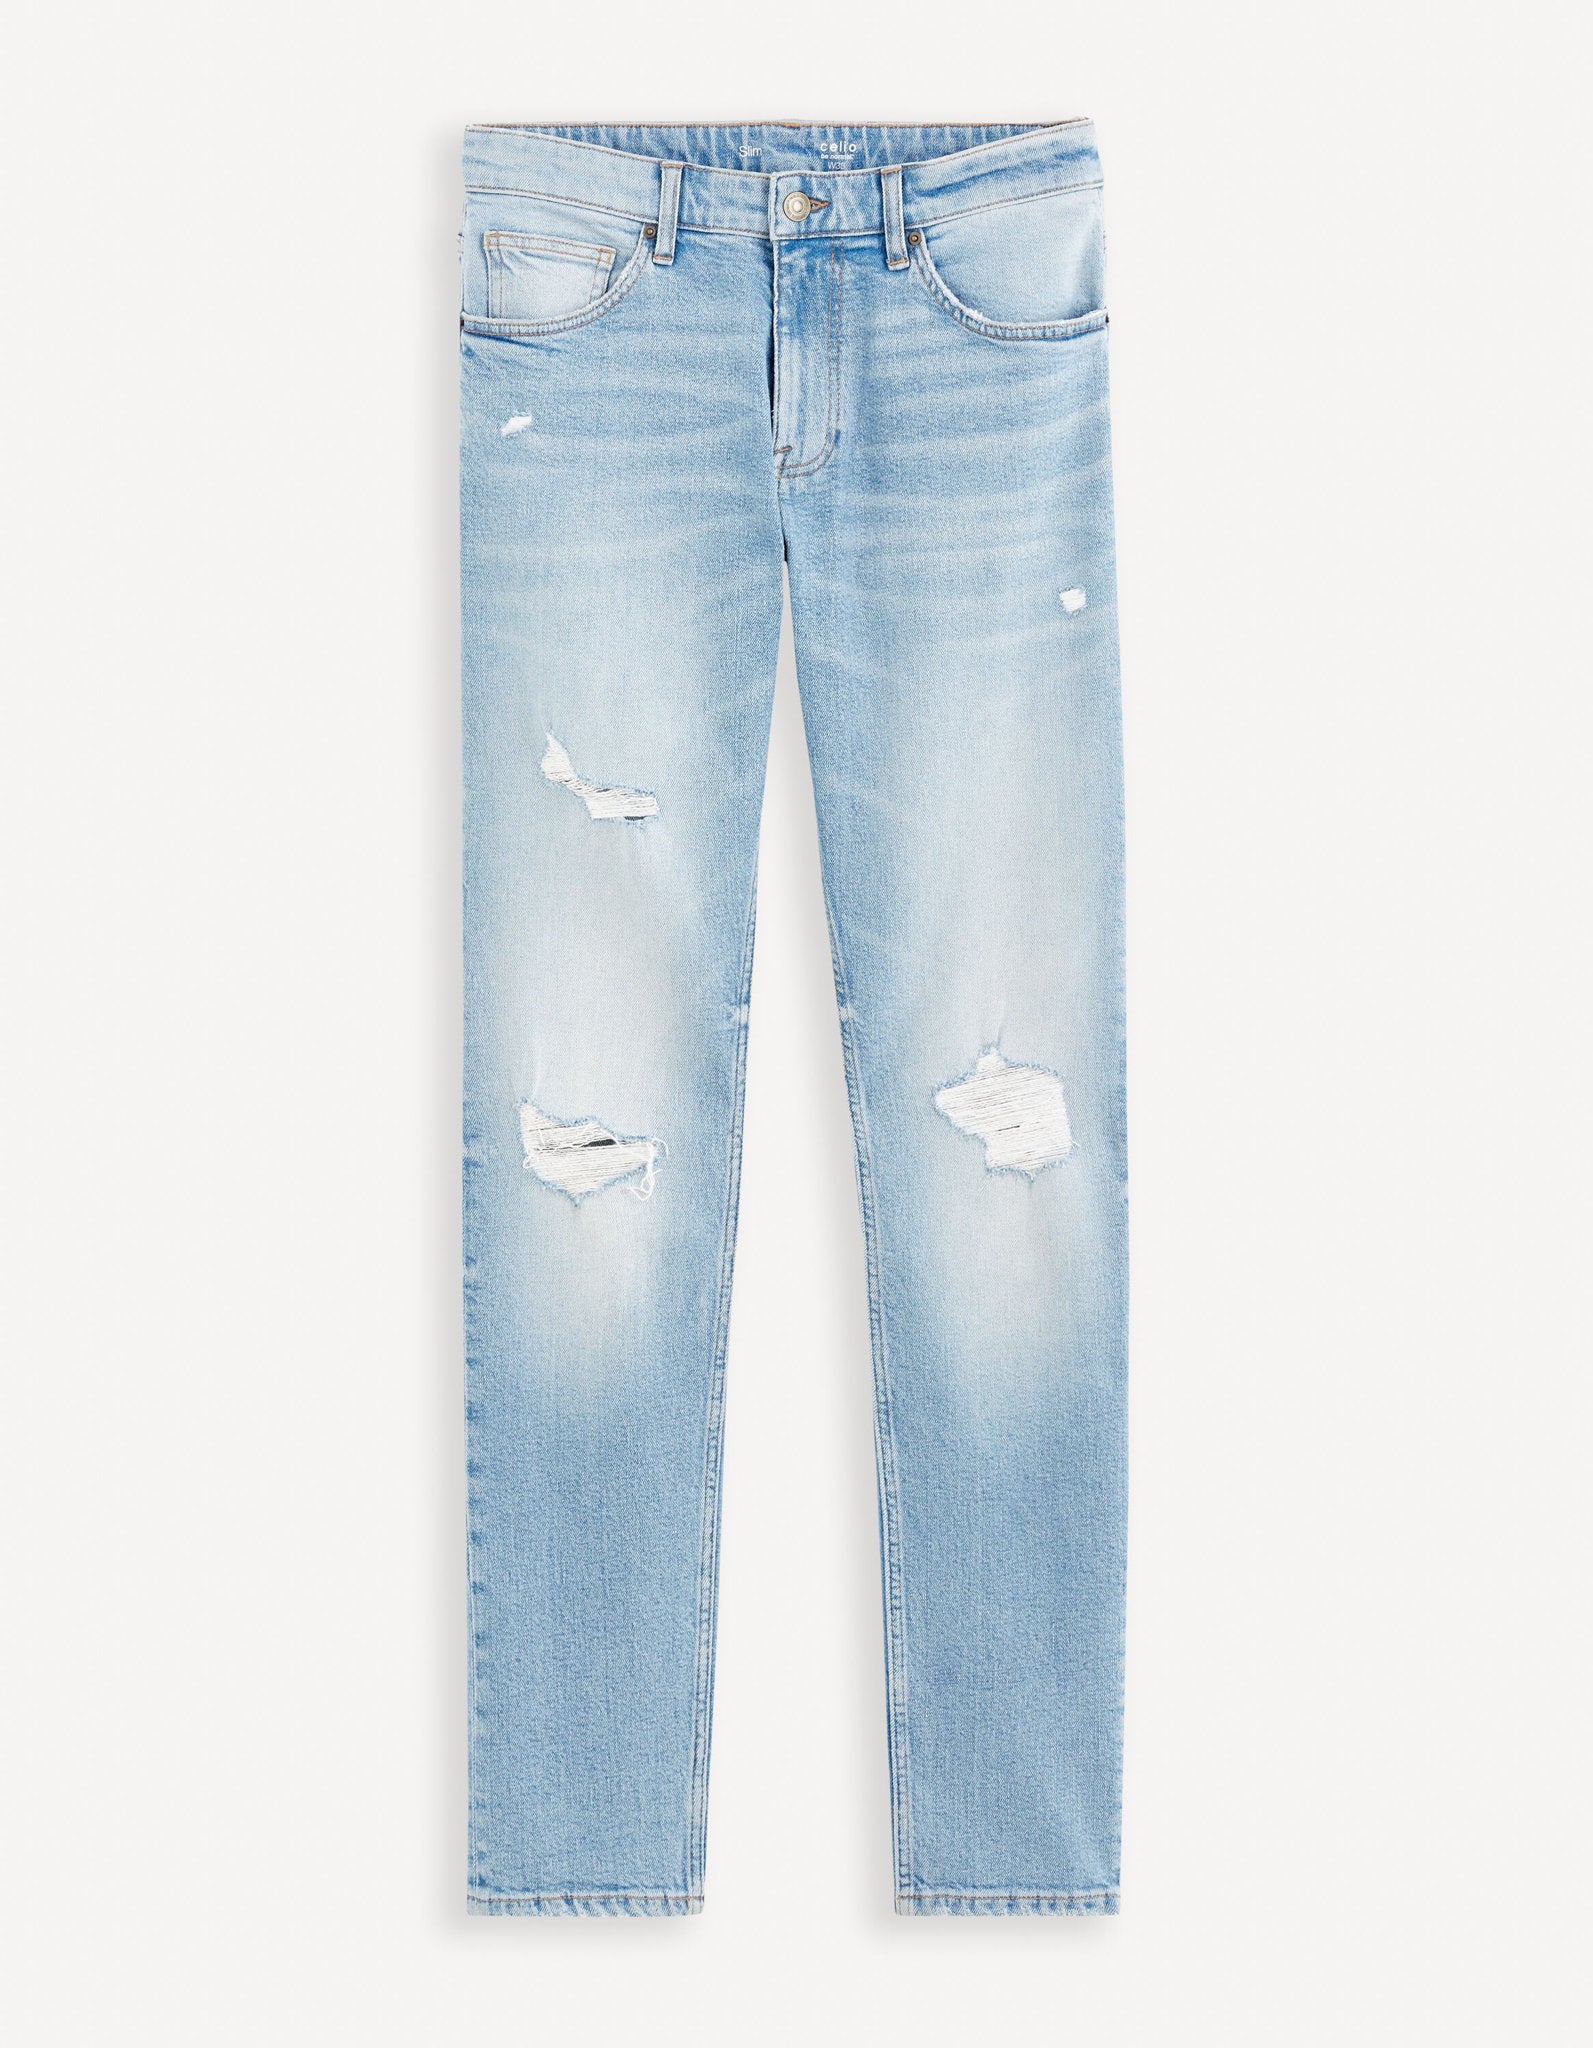 C25 Slim Stretch Jeans_FOSTROY_BLEACHED_01